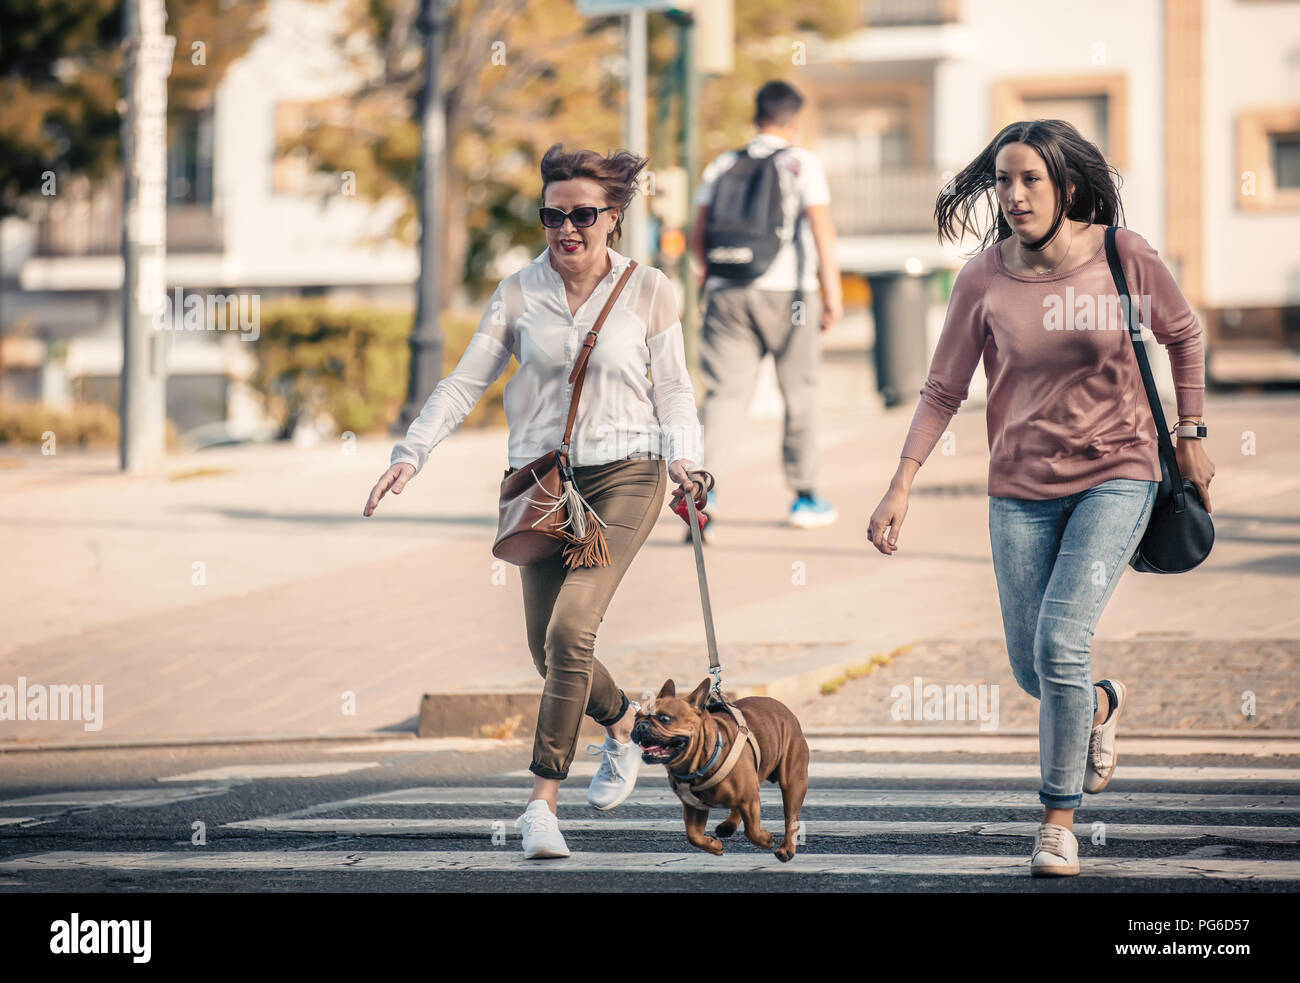 Two women with a dog hurrying through a crossingwalk. Stock Photo